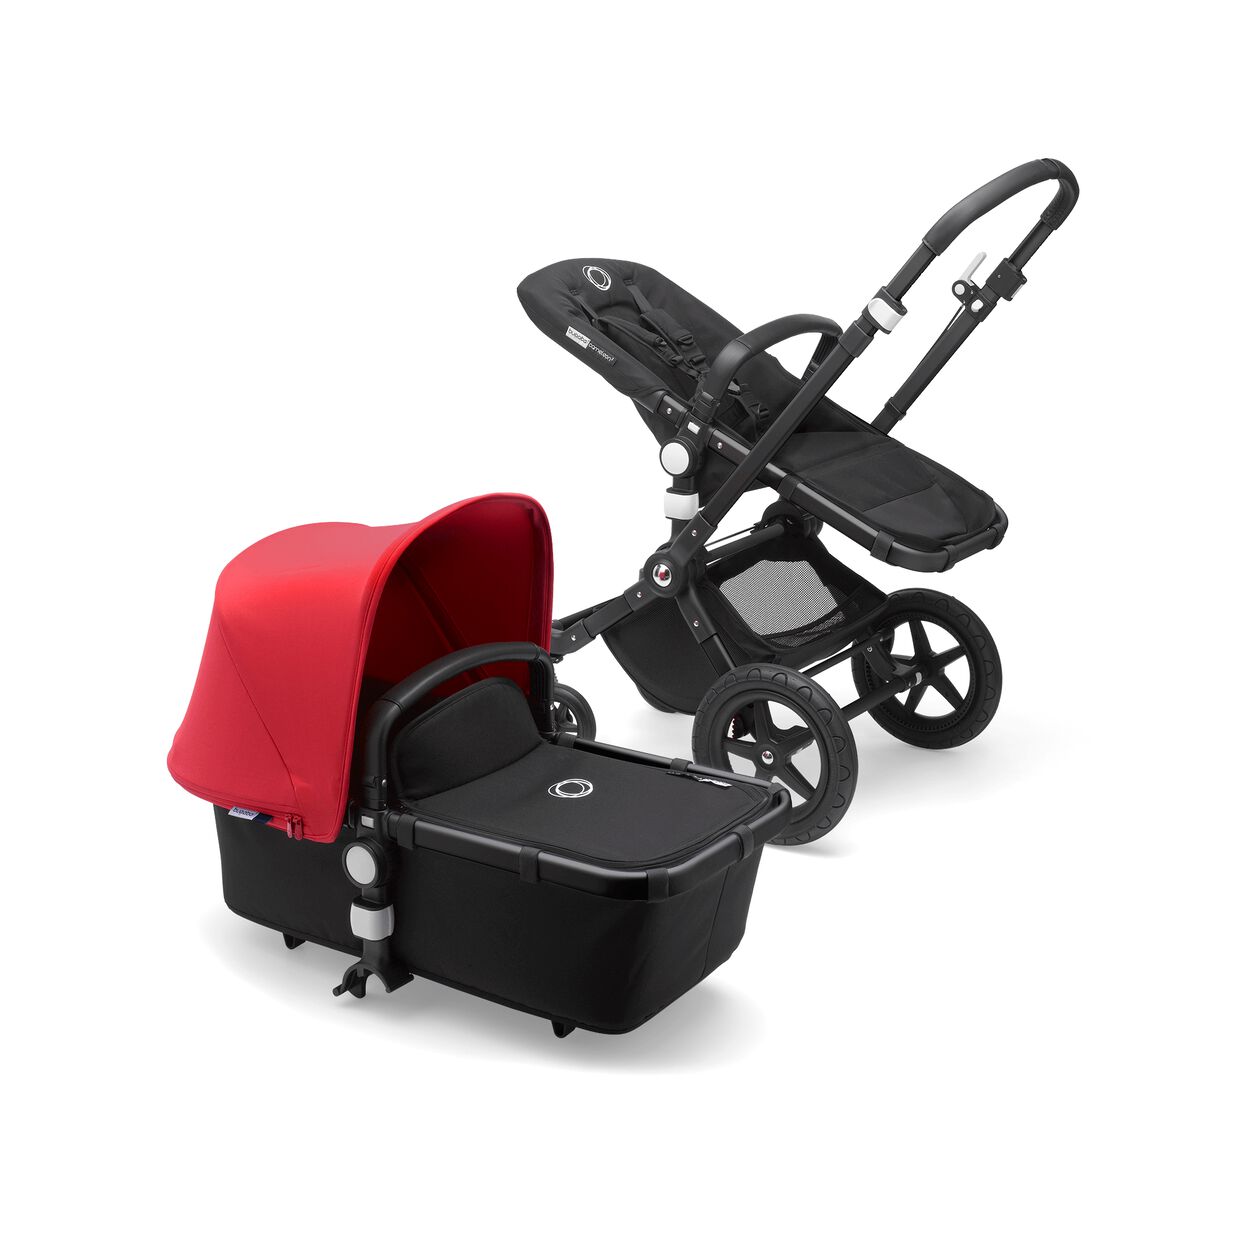 135215PV003117_bugaboo_cameleon_3plus_blk_blk_red_1